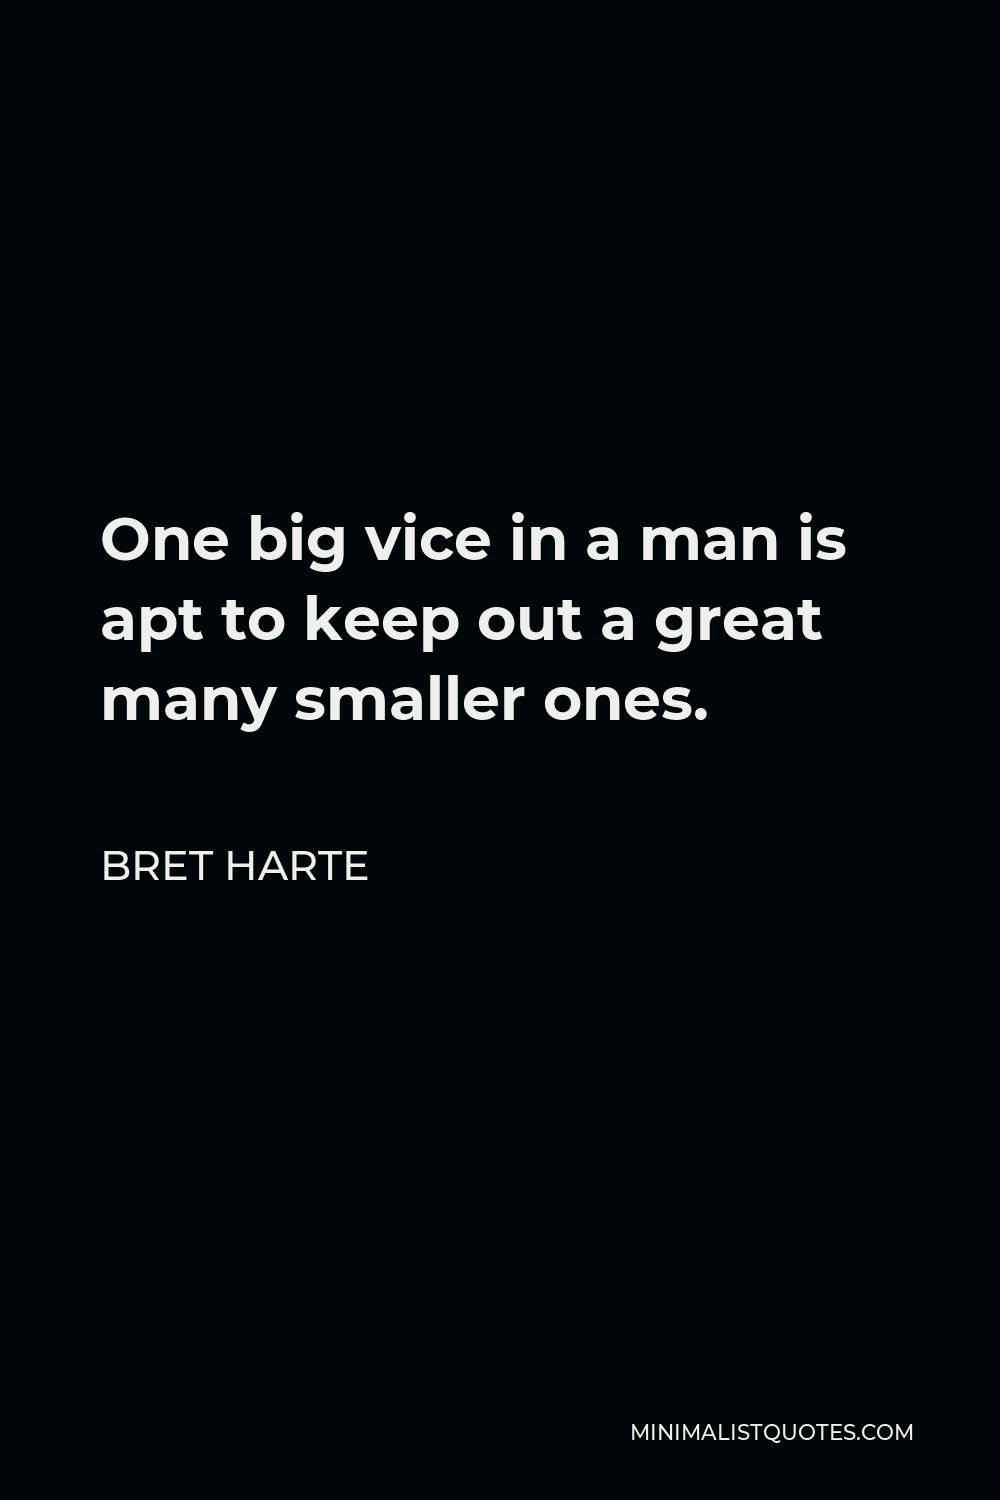 Bret Harte Quote - One big vice in a man is apt to keep out a great many smaller ones.